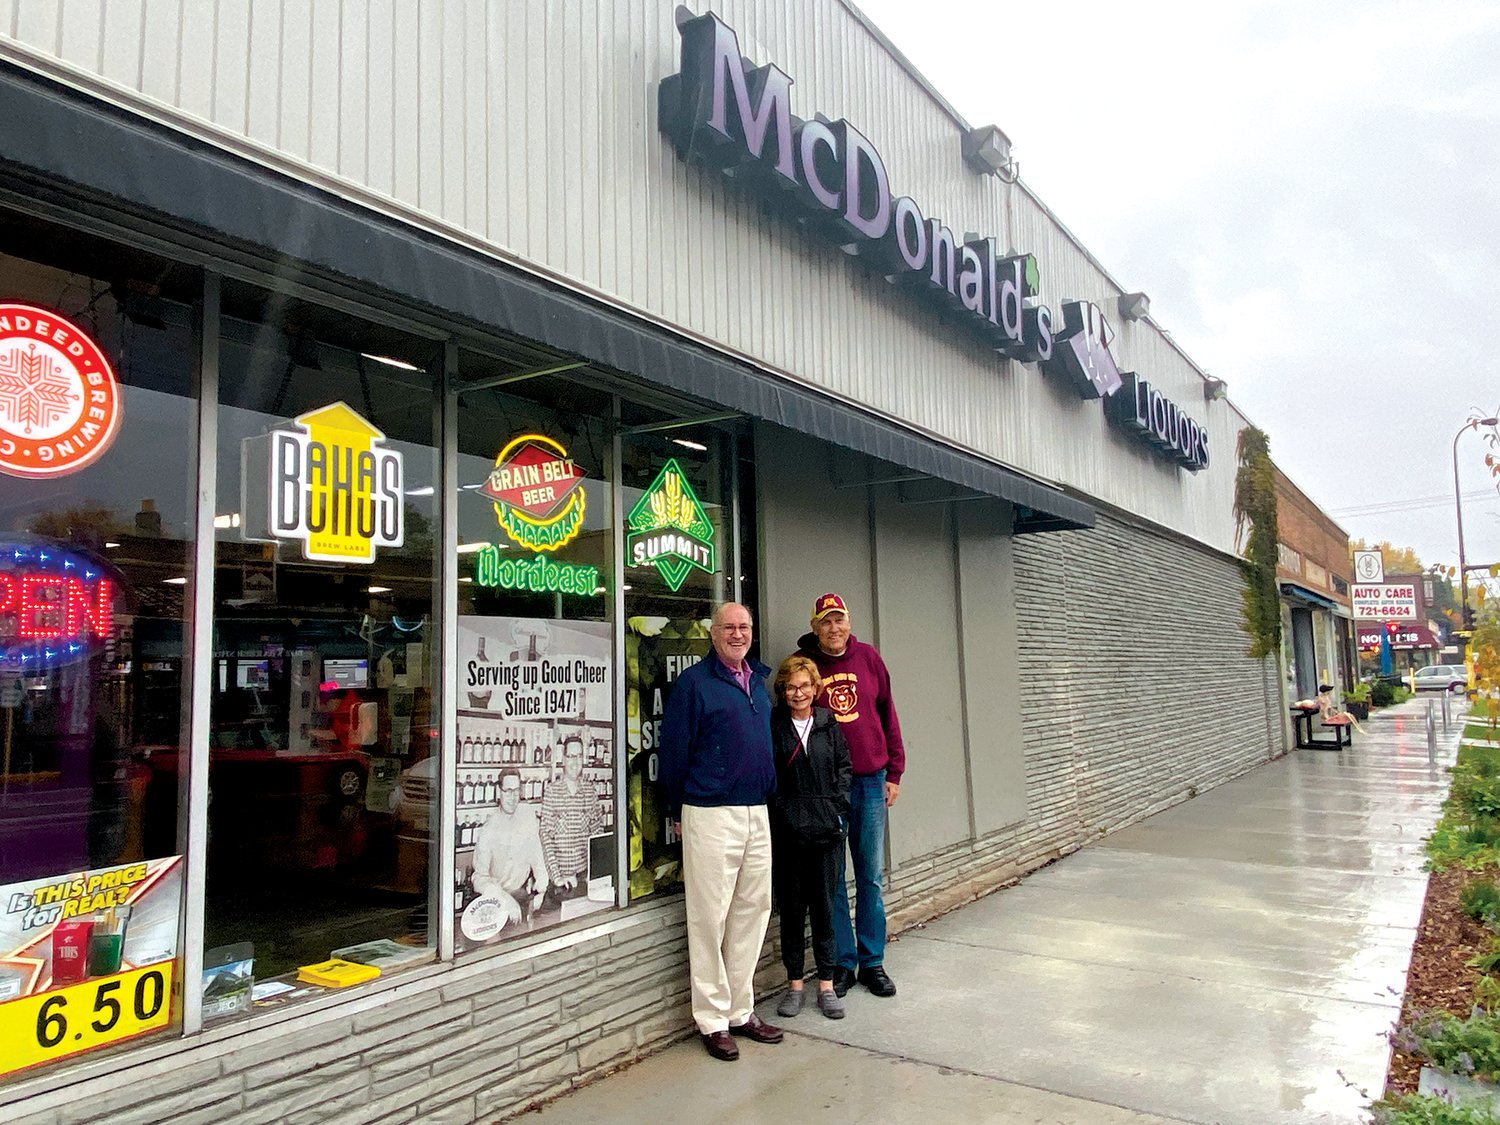 Bob Albrecht (left) stands with Janet and Lee Nelson outside McDonald's Liquor store along 34th Ave. Albrecht currently lives and works from home in the house Janet's dad built along Shoreview Ave. Lester Strom was a self-employed home-builder whose firm, Strom & Mayville, constructed many single-family homes, apartments and duplexes in the Nokomis East neighborhood.